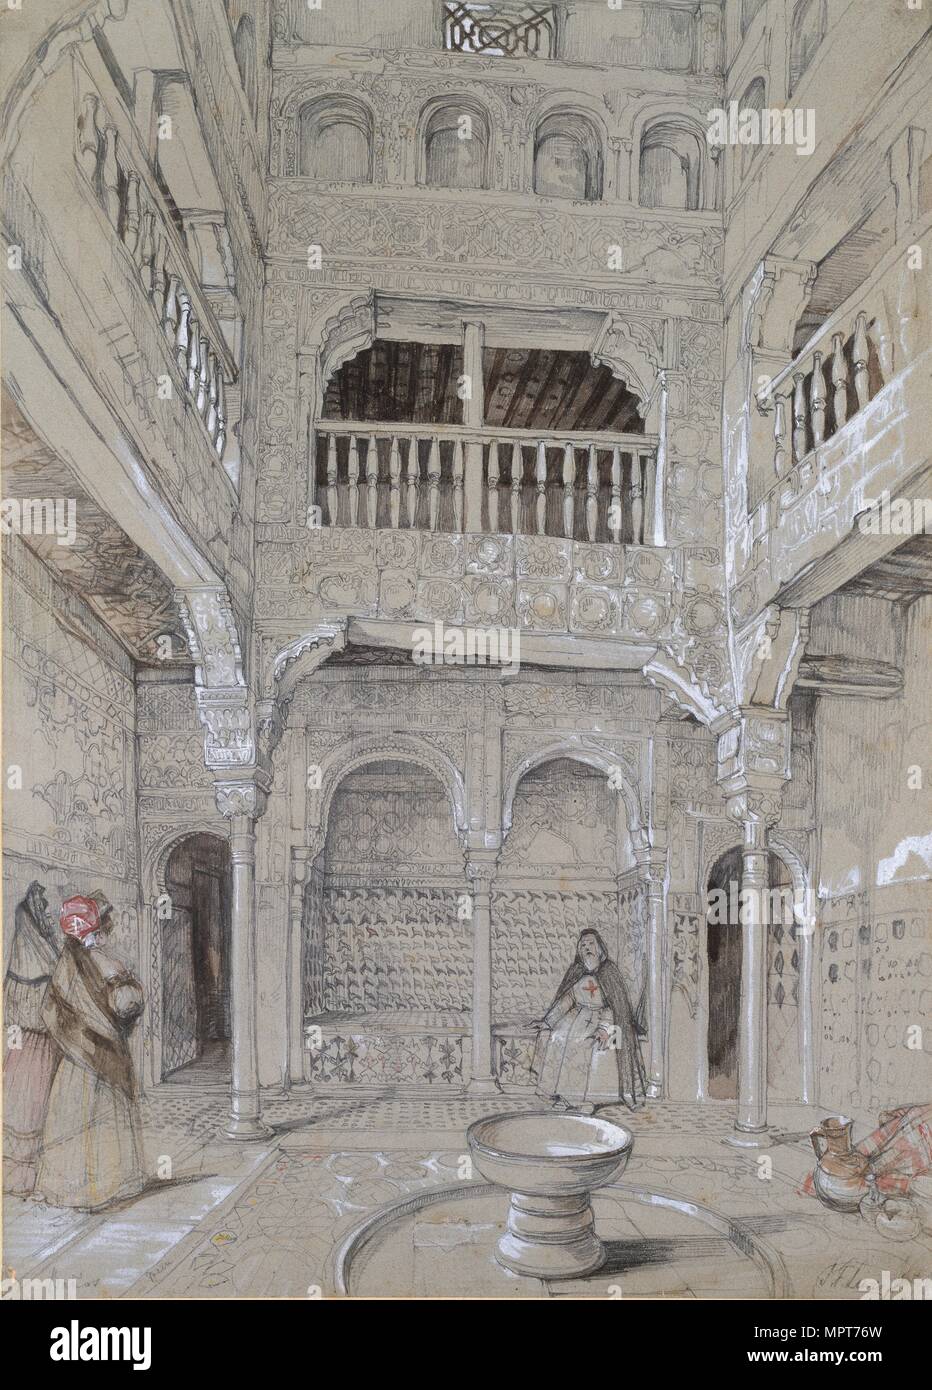 Entrance to the Baths at the Alhambra, c1830s. Artist: John Frederick Lewis. Stock Photo